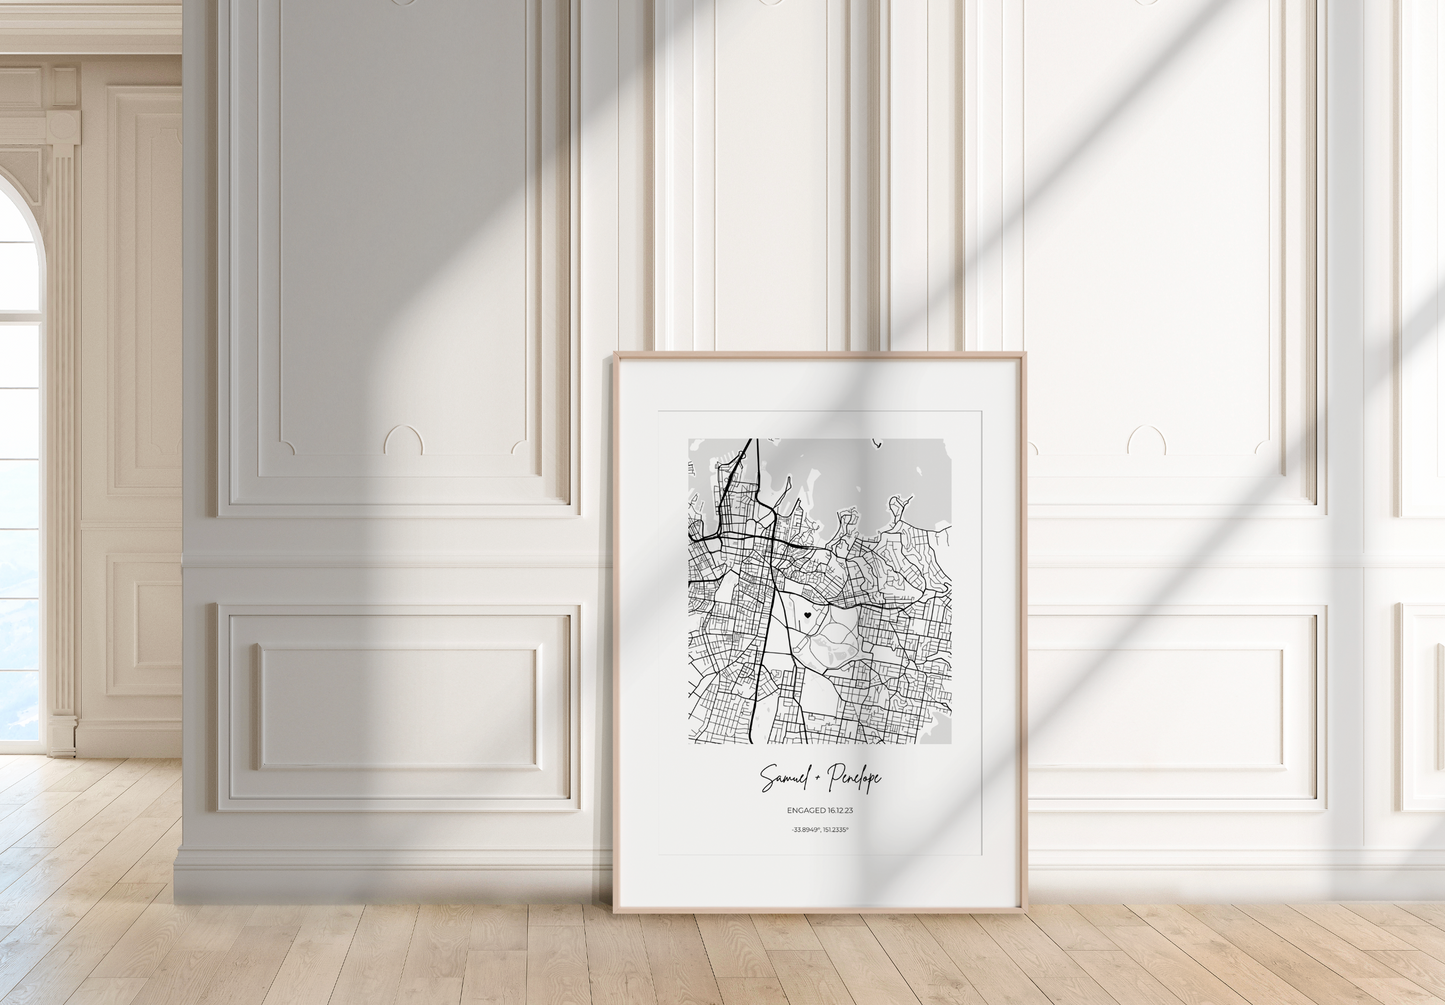 Square Location Map Personalised Print